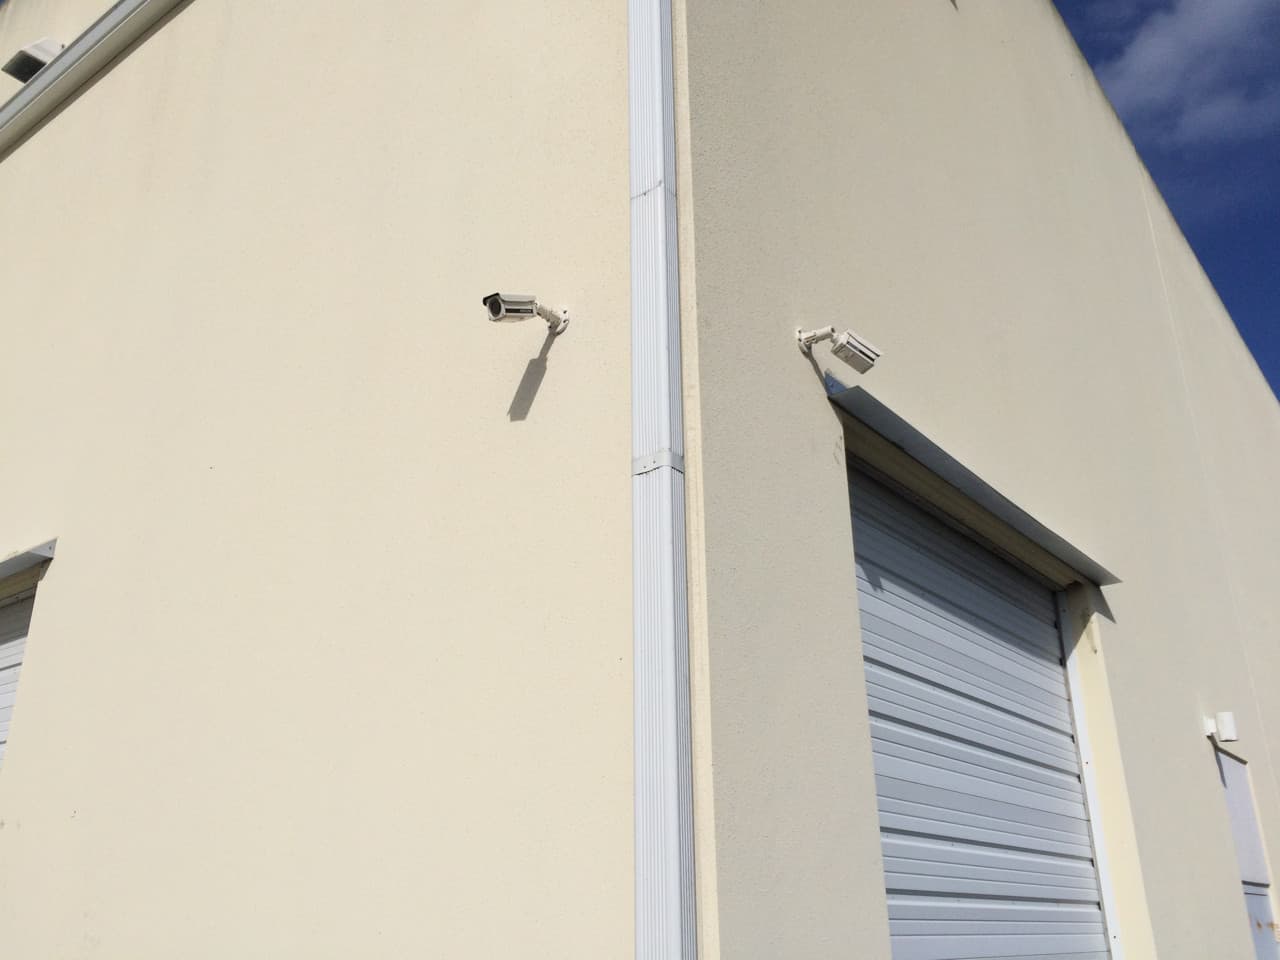 Outdoor Security Camera Mounted on Warehouse